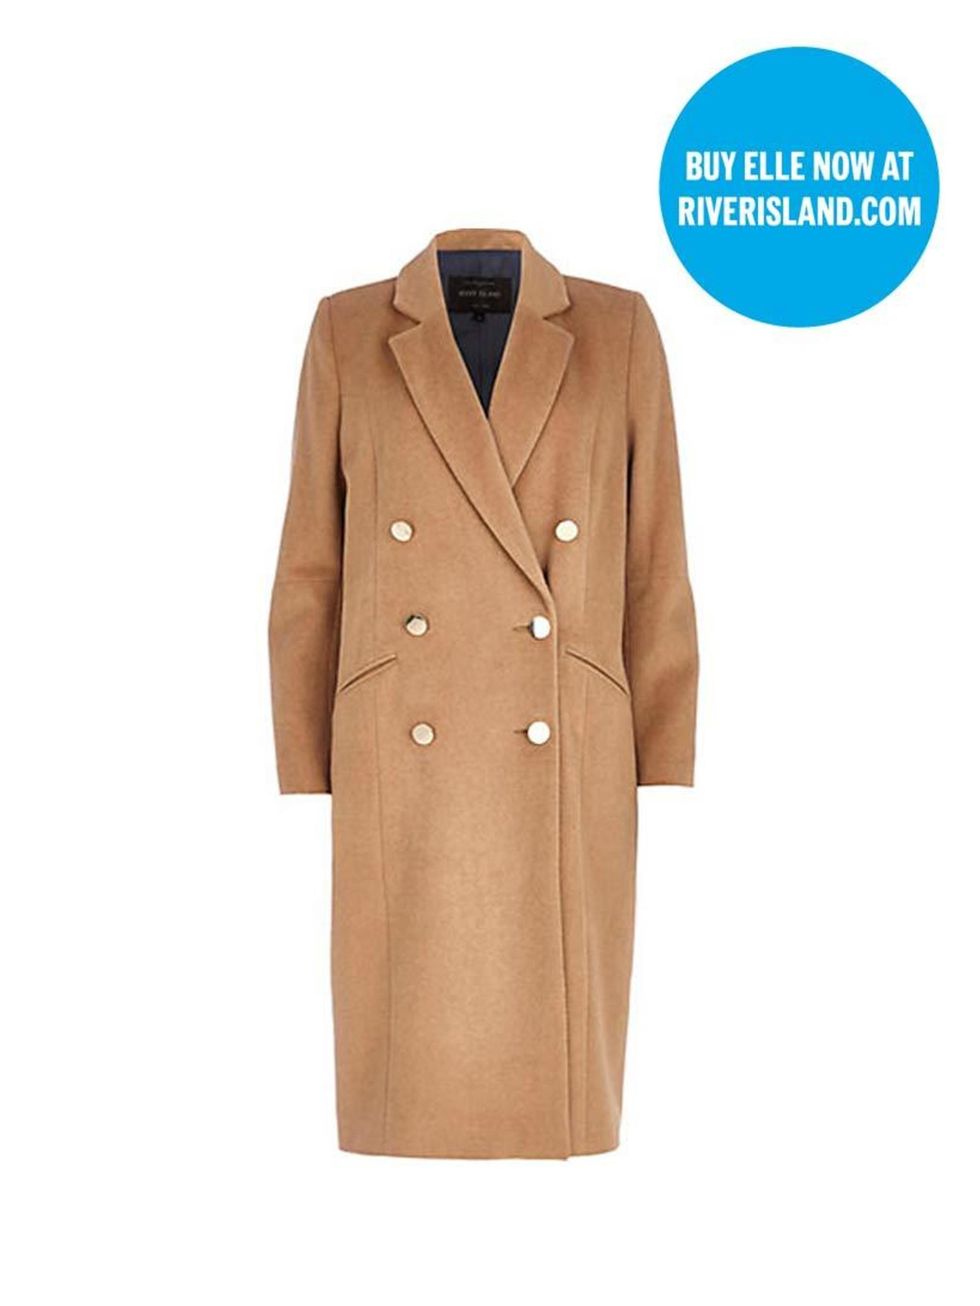 <p>Classic camel is always in style. And now, while you're shopping at River Island, you can pick up the latest issue of ELLE. Two birds...</p>

<p><a href="http://www.riverisland.com/women/coats--jackets/coats/Camel-double-breasted-midi-coat-660160" targ